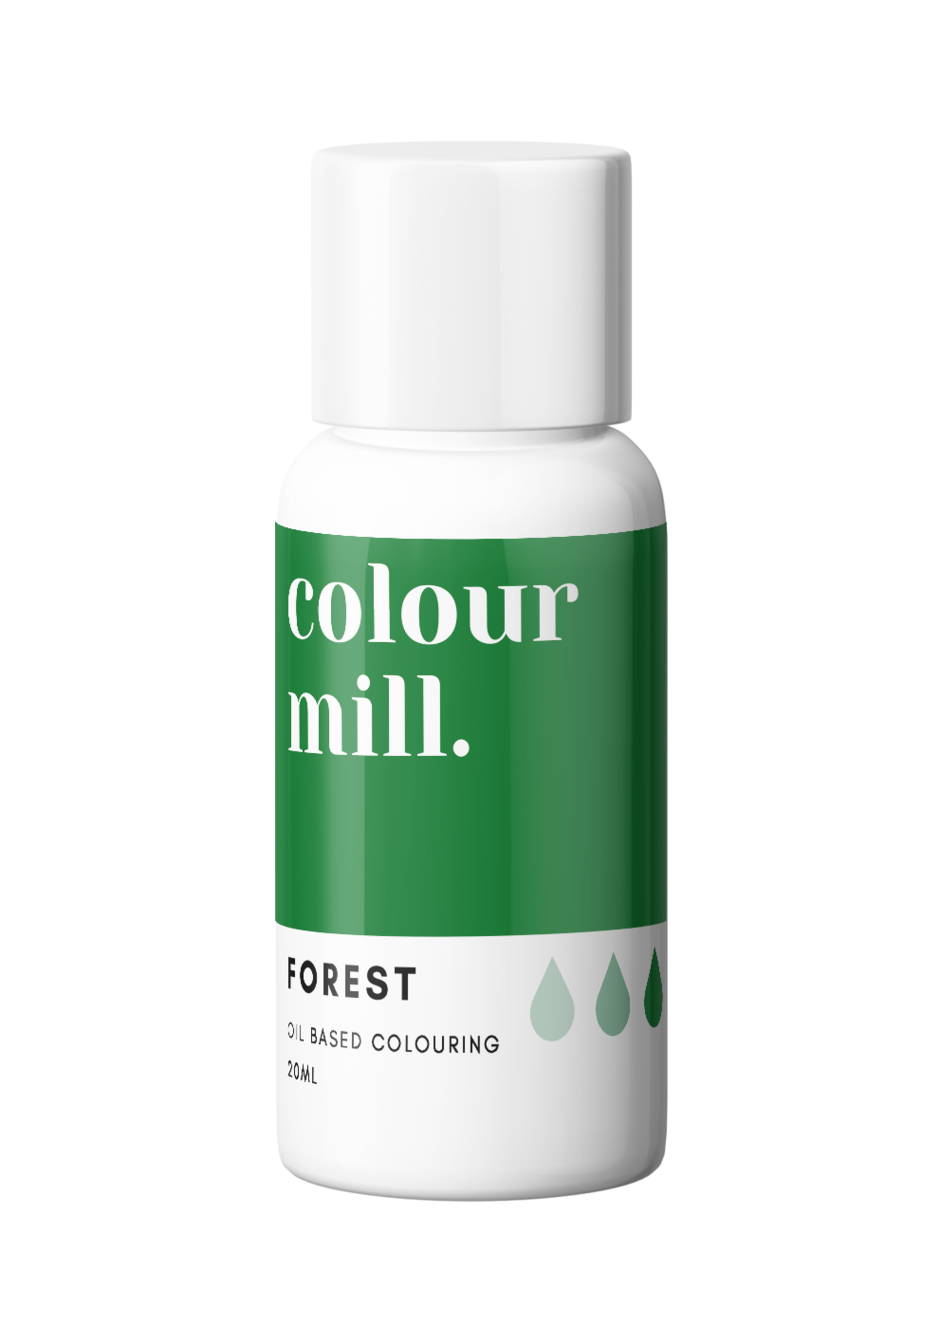 Forest, 20ml, Colour Mill Oil Based Colouring